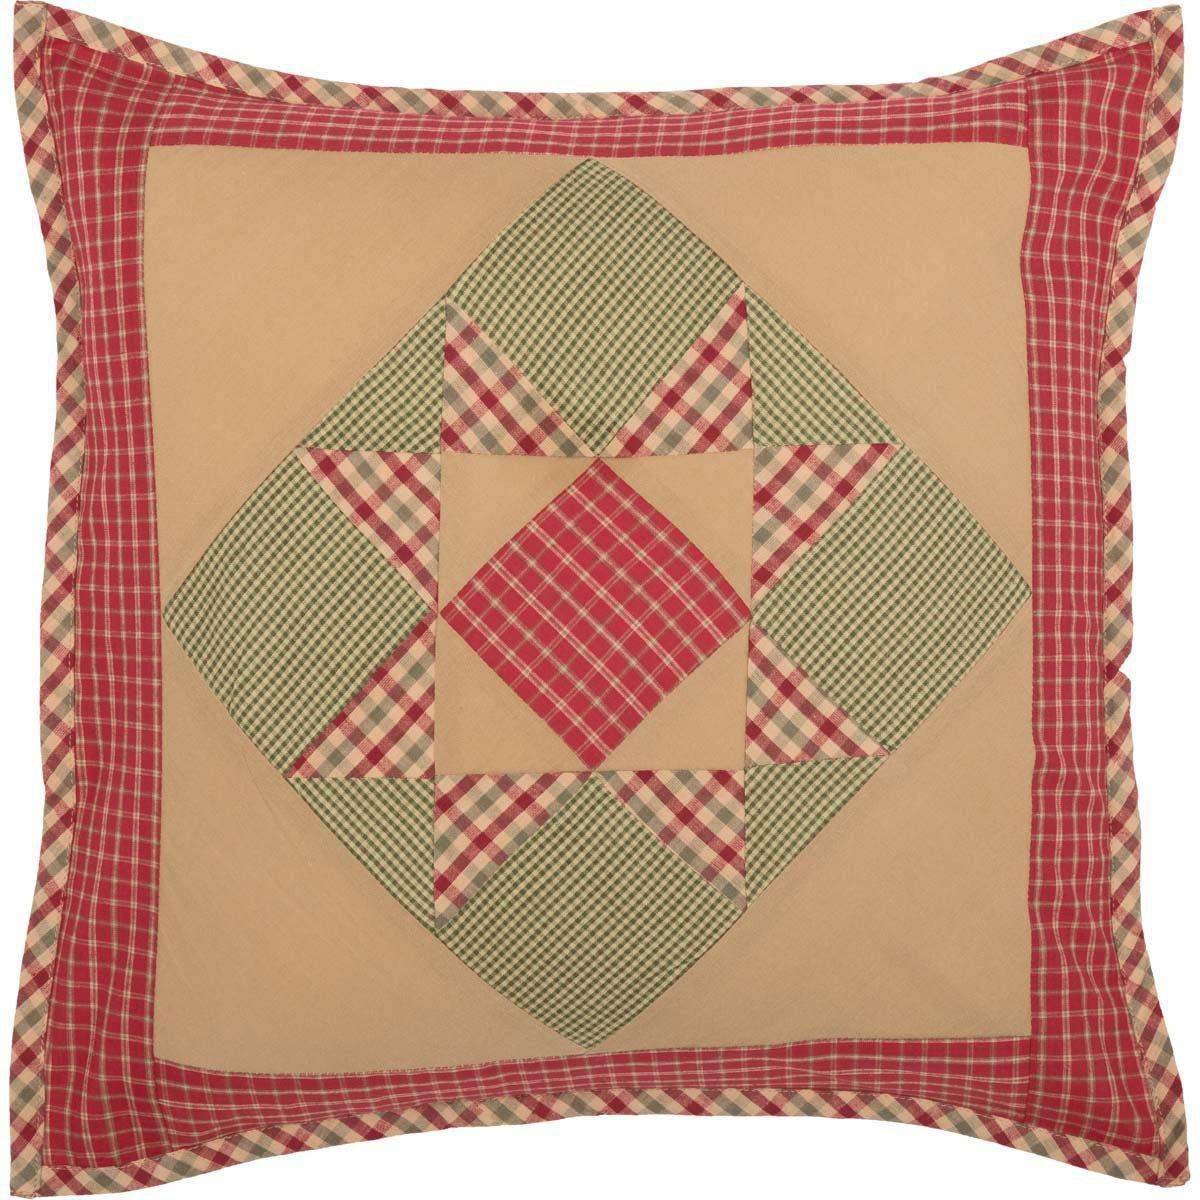 Dolly Star Patchwork Pillow 18x18 VHC Brands front